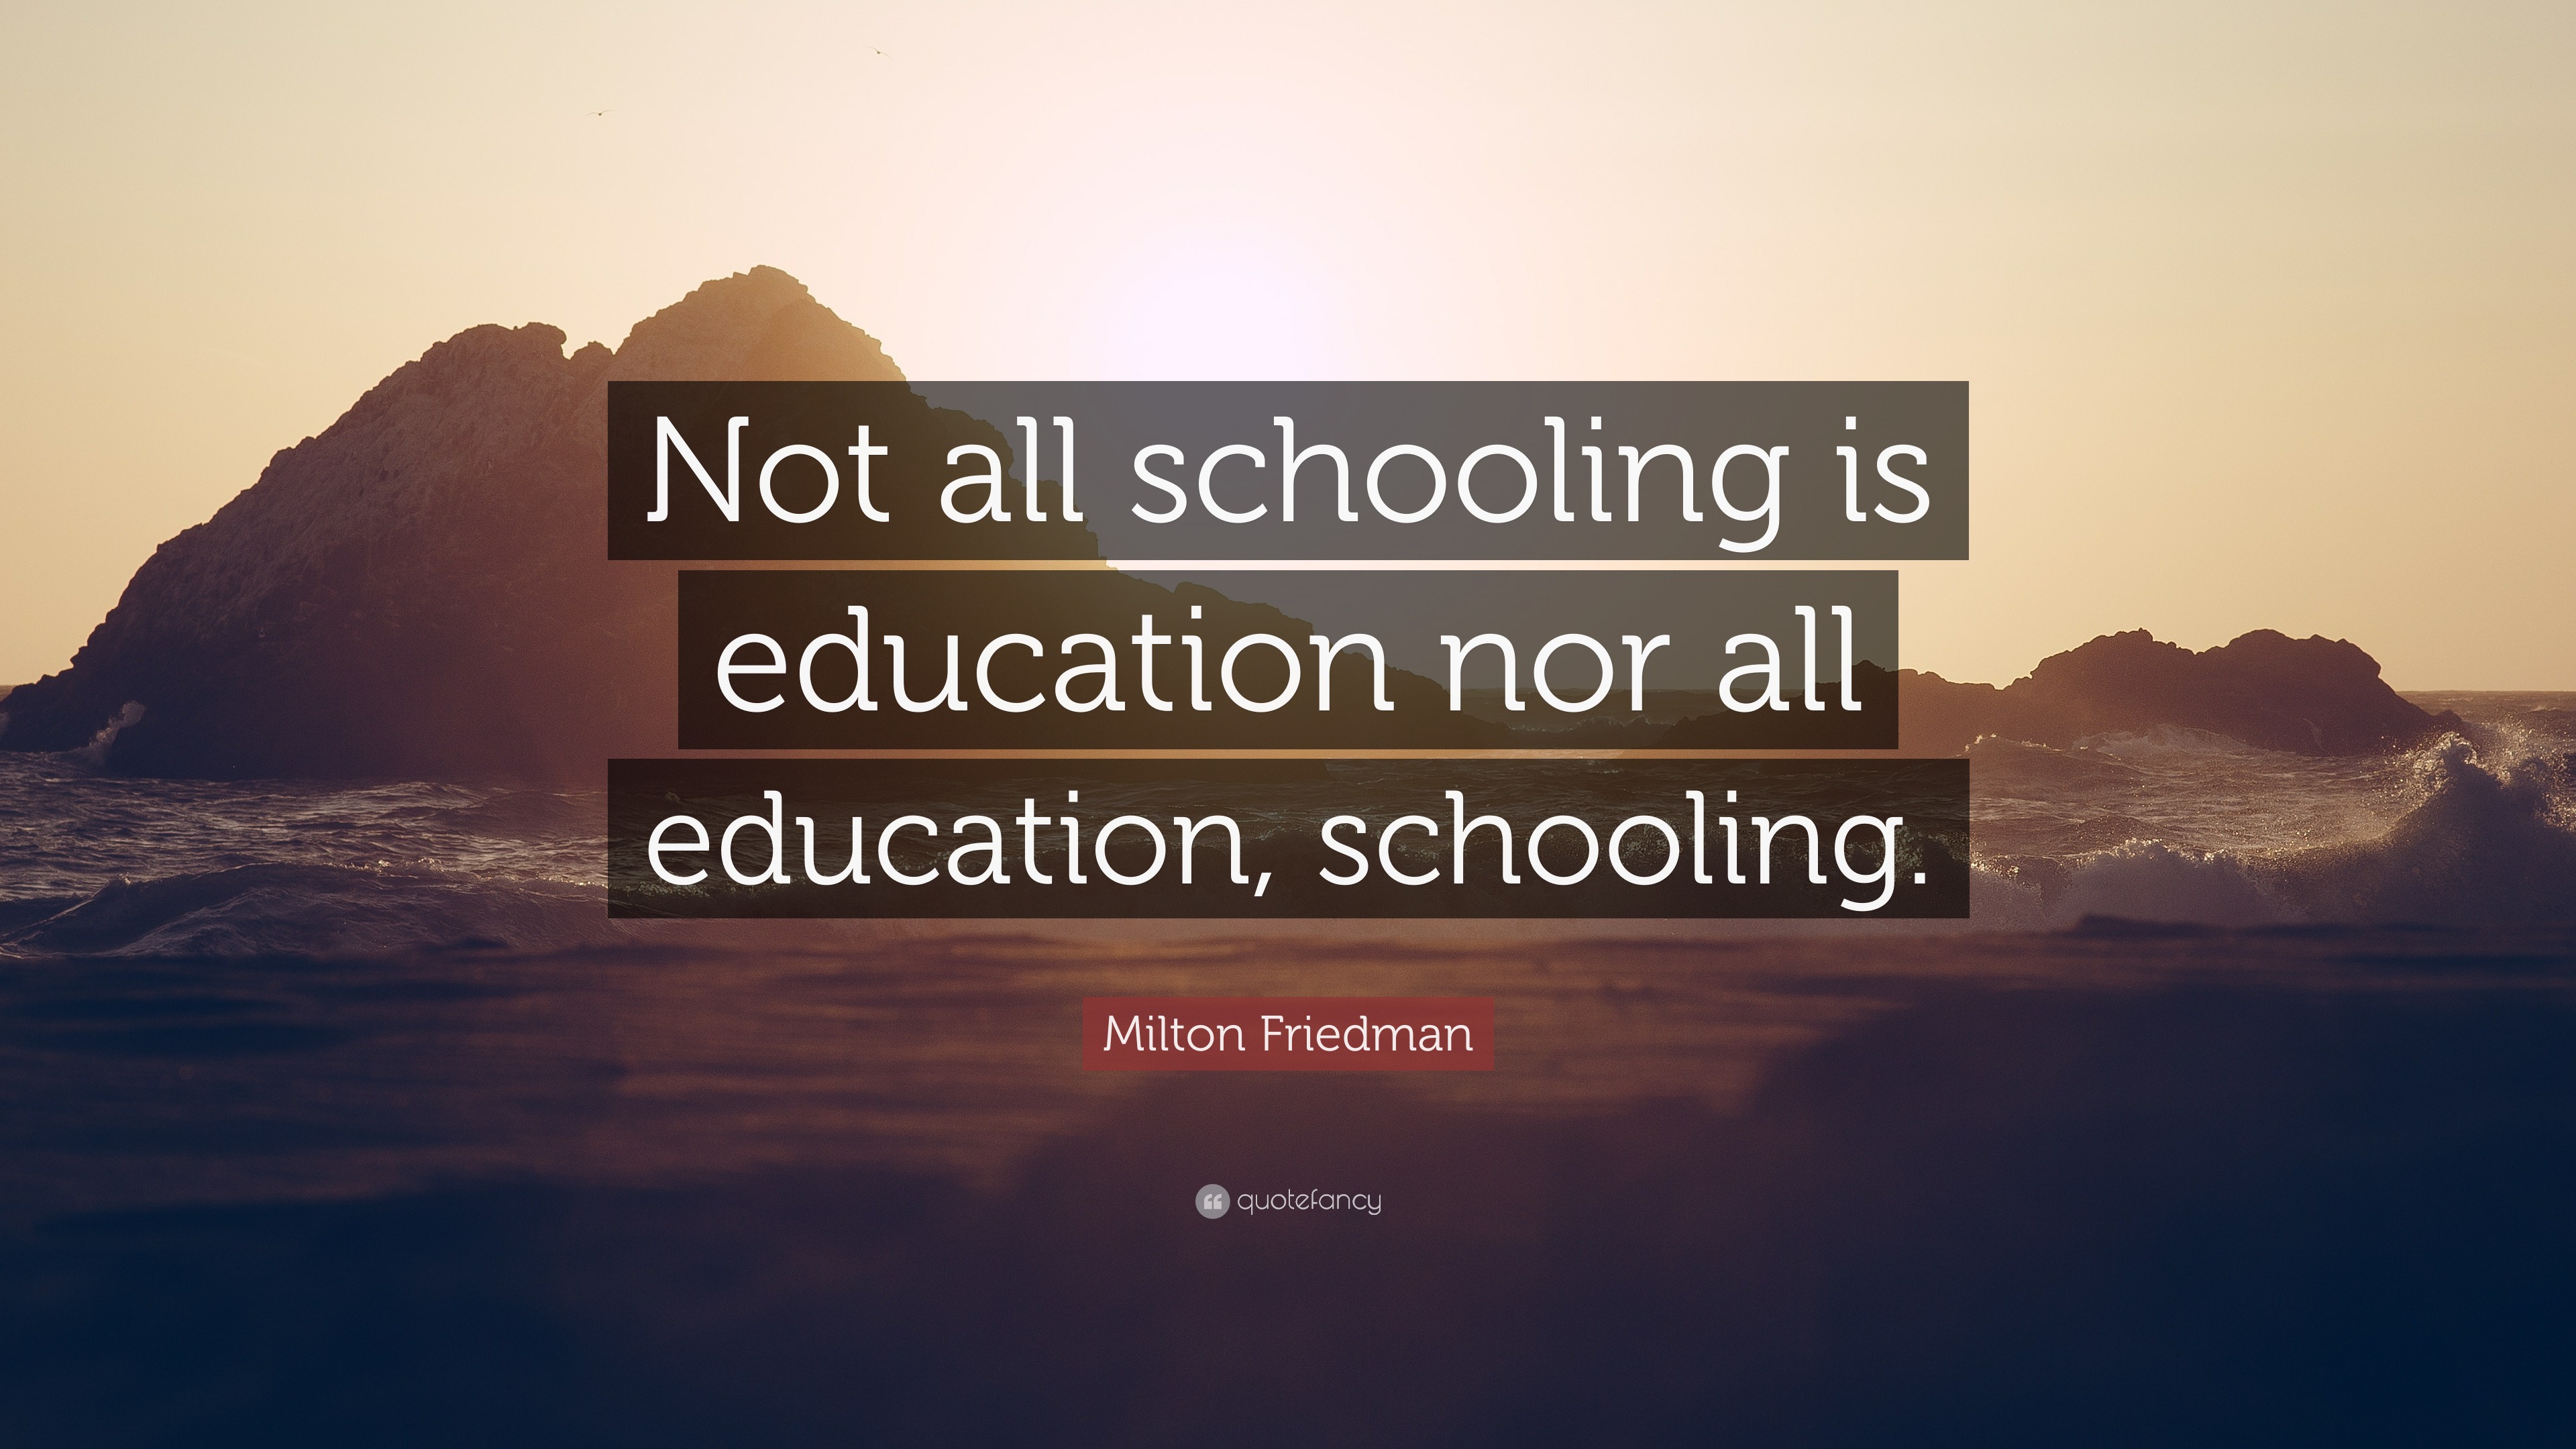 Milton Friedman Quote: “Not all schooling is education nor all ...